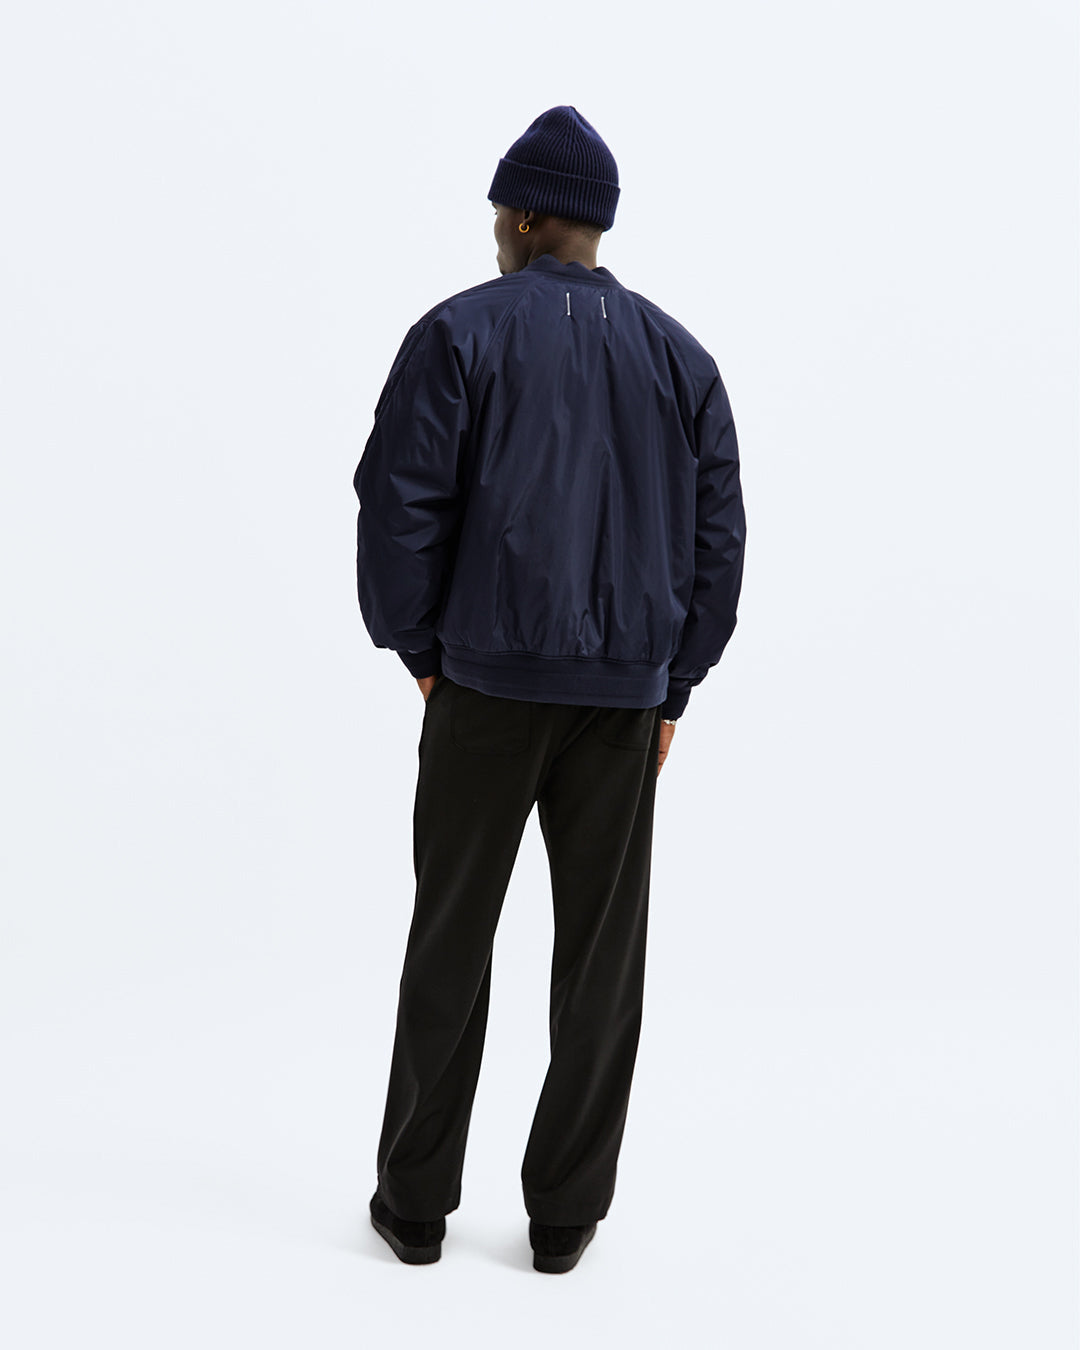 Wool Twill Rugby Pant